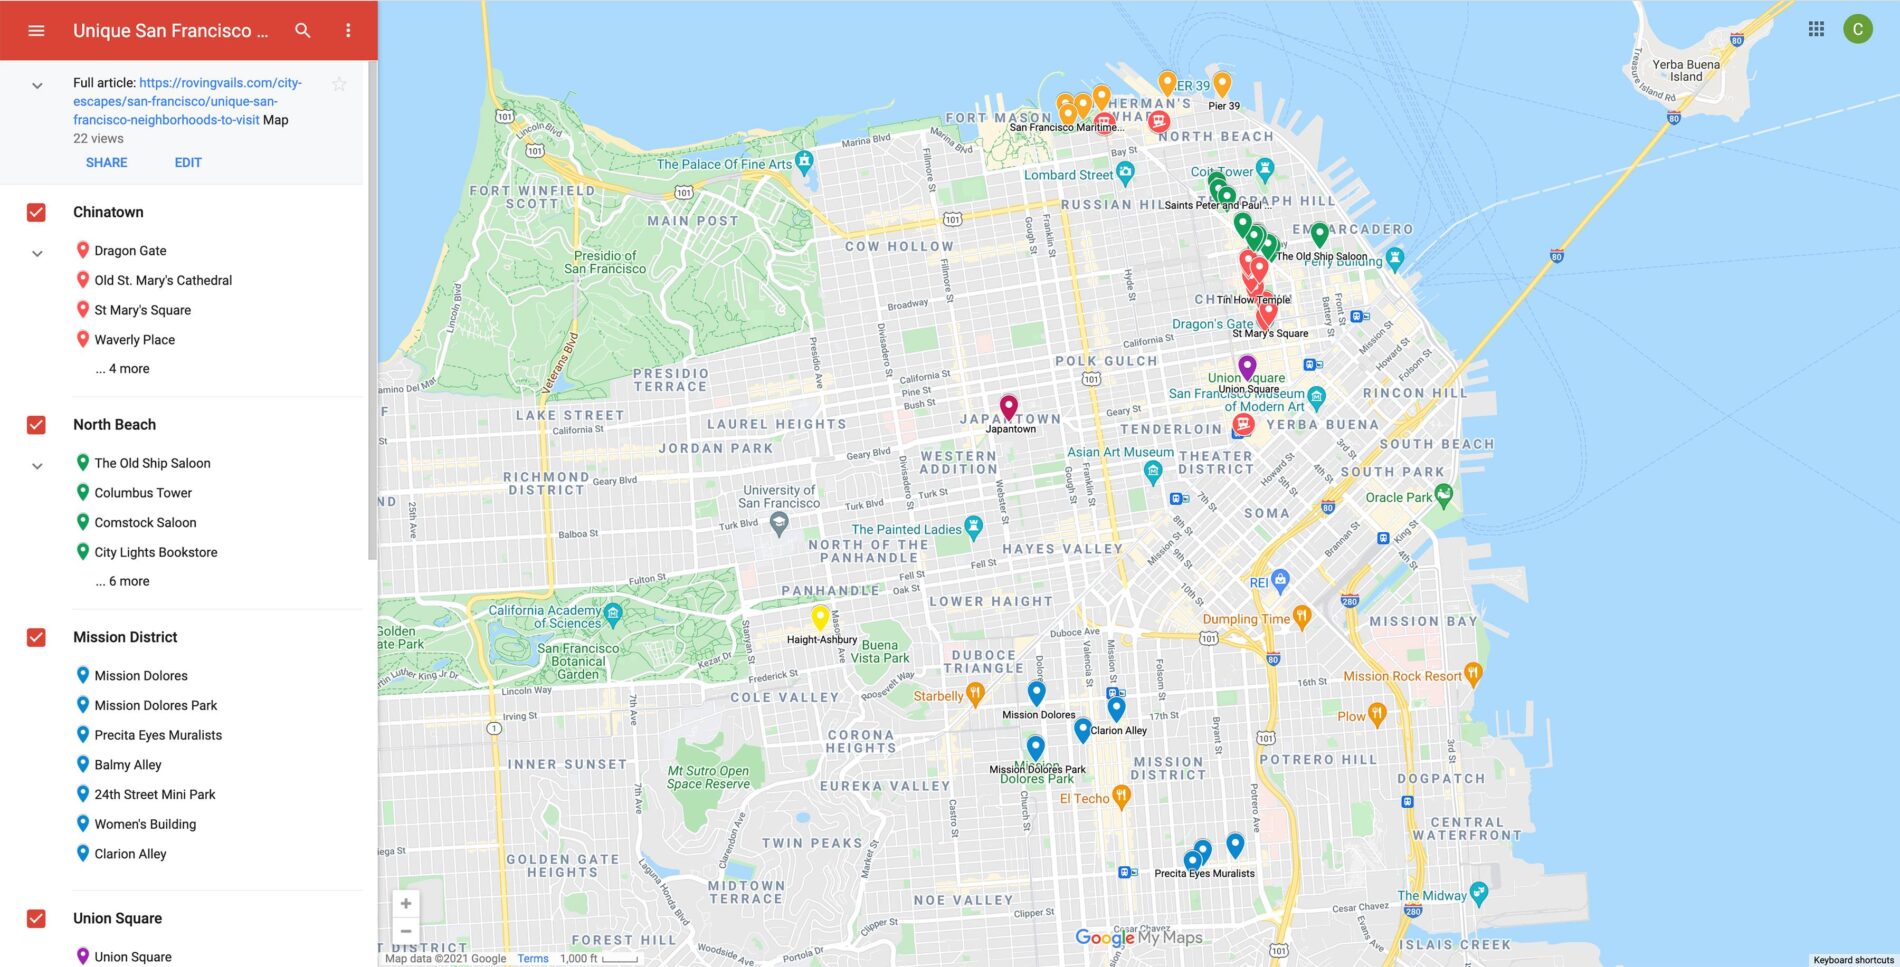 Map with pins marking 7 interesting and iconic San Francisco neighborhoods.